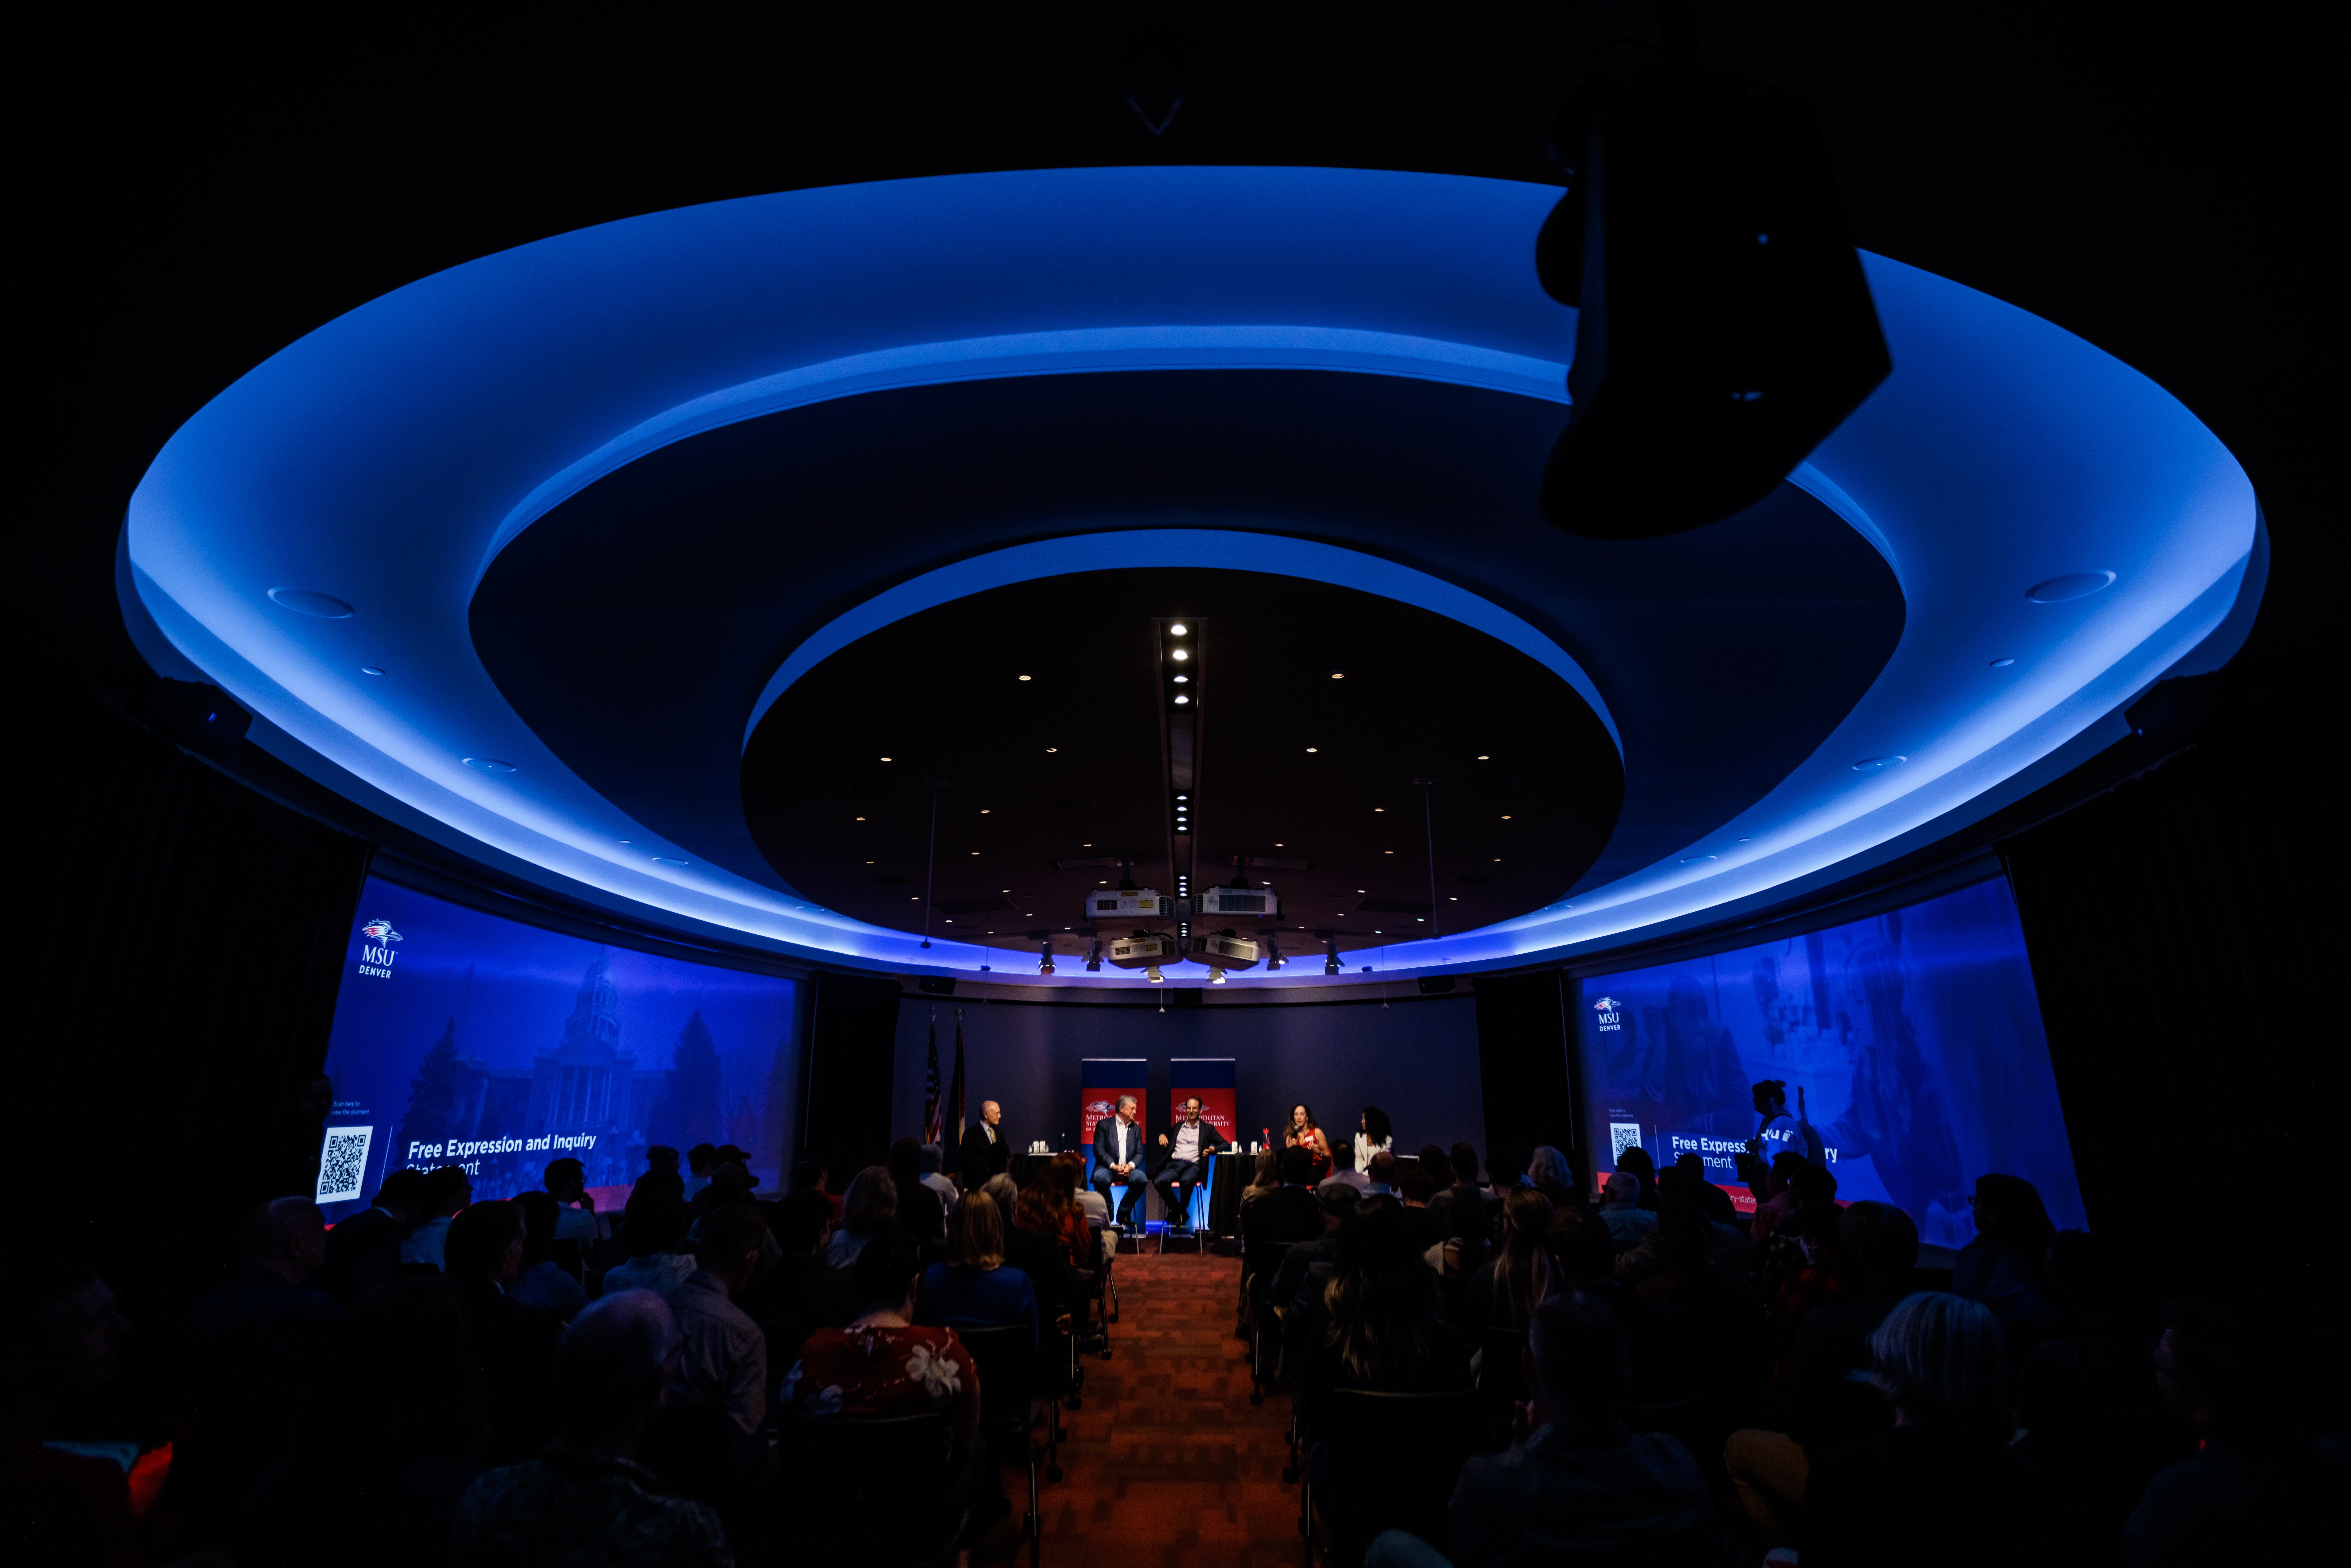 The darkened CAVEA Theater is highlighted by it's custom blue ceiling lighting.